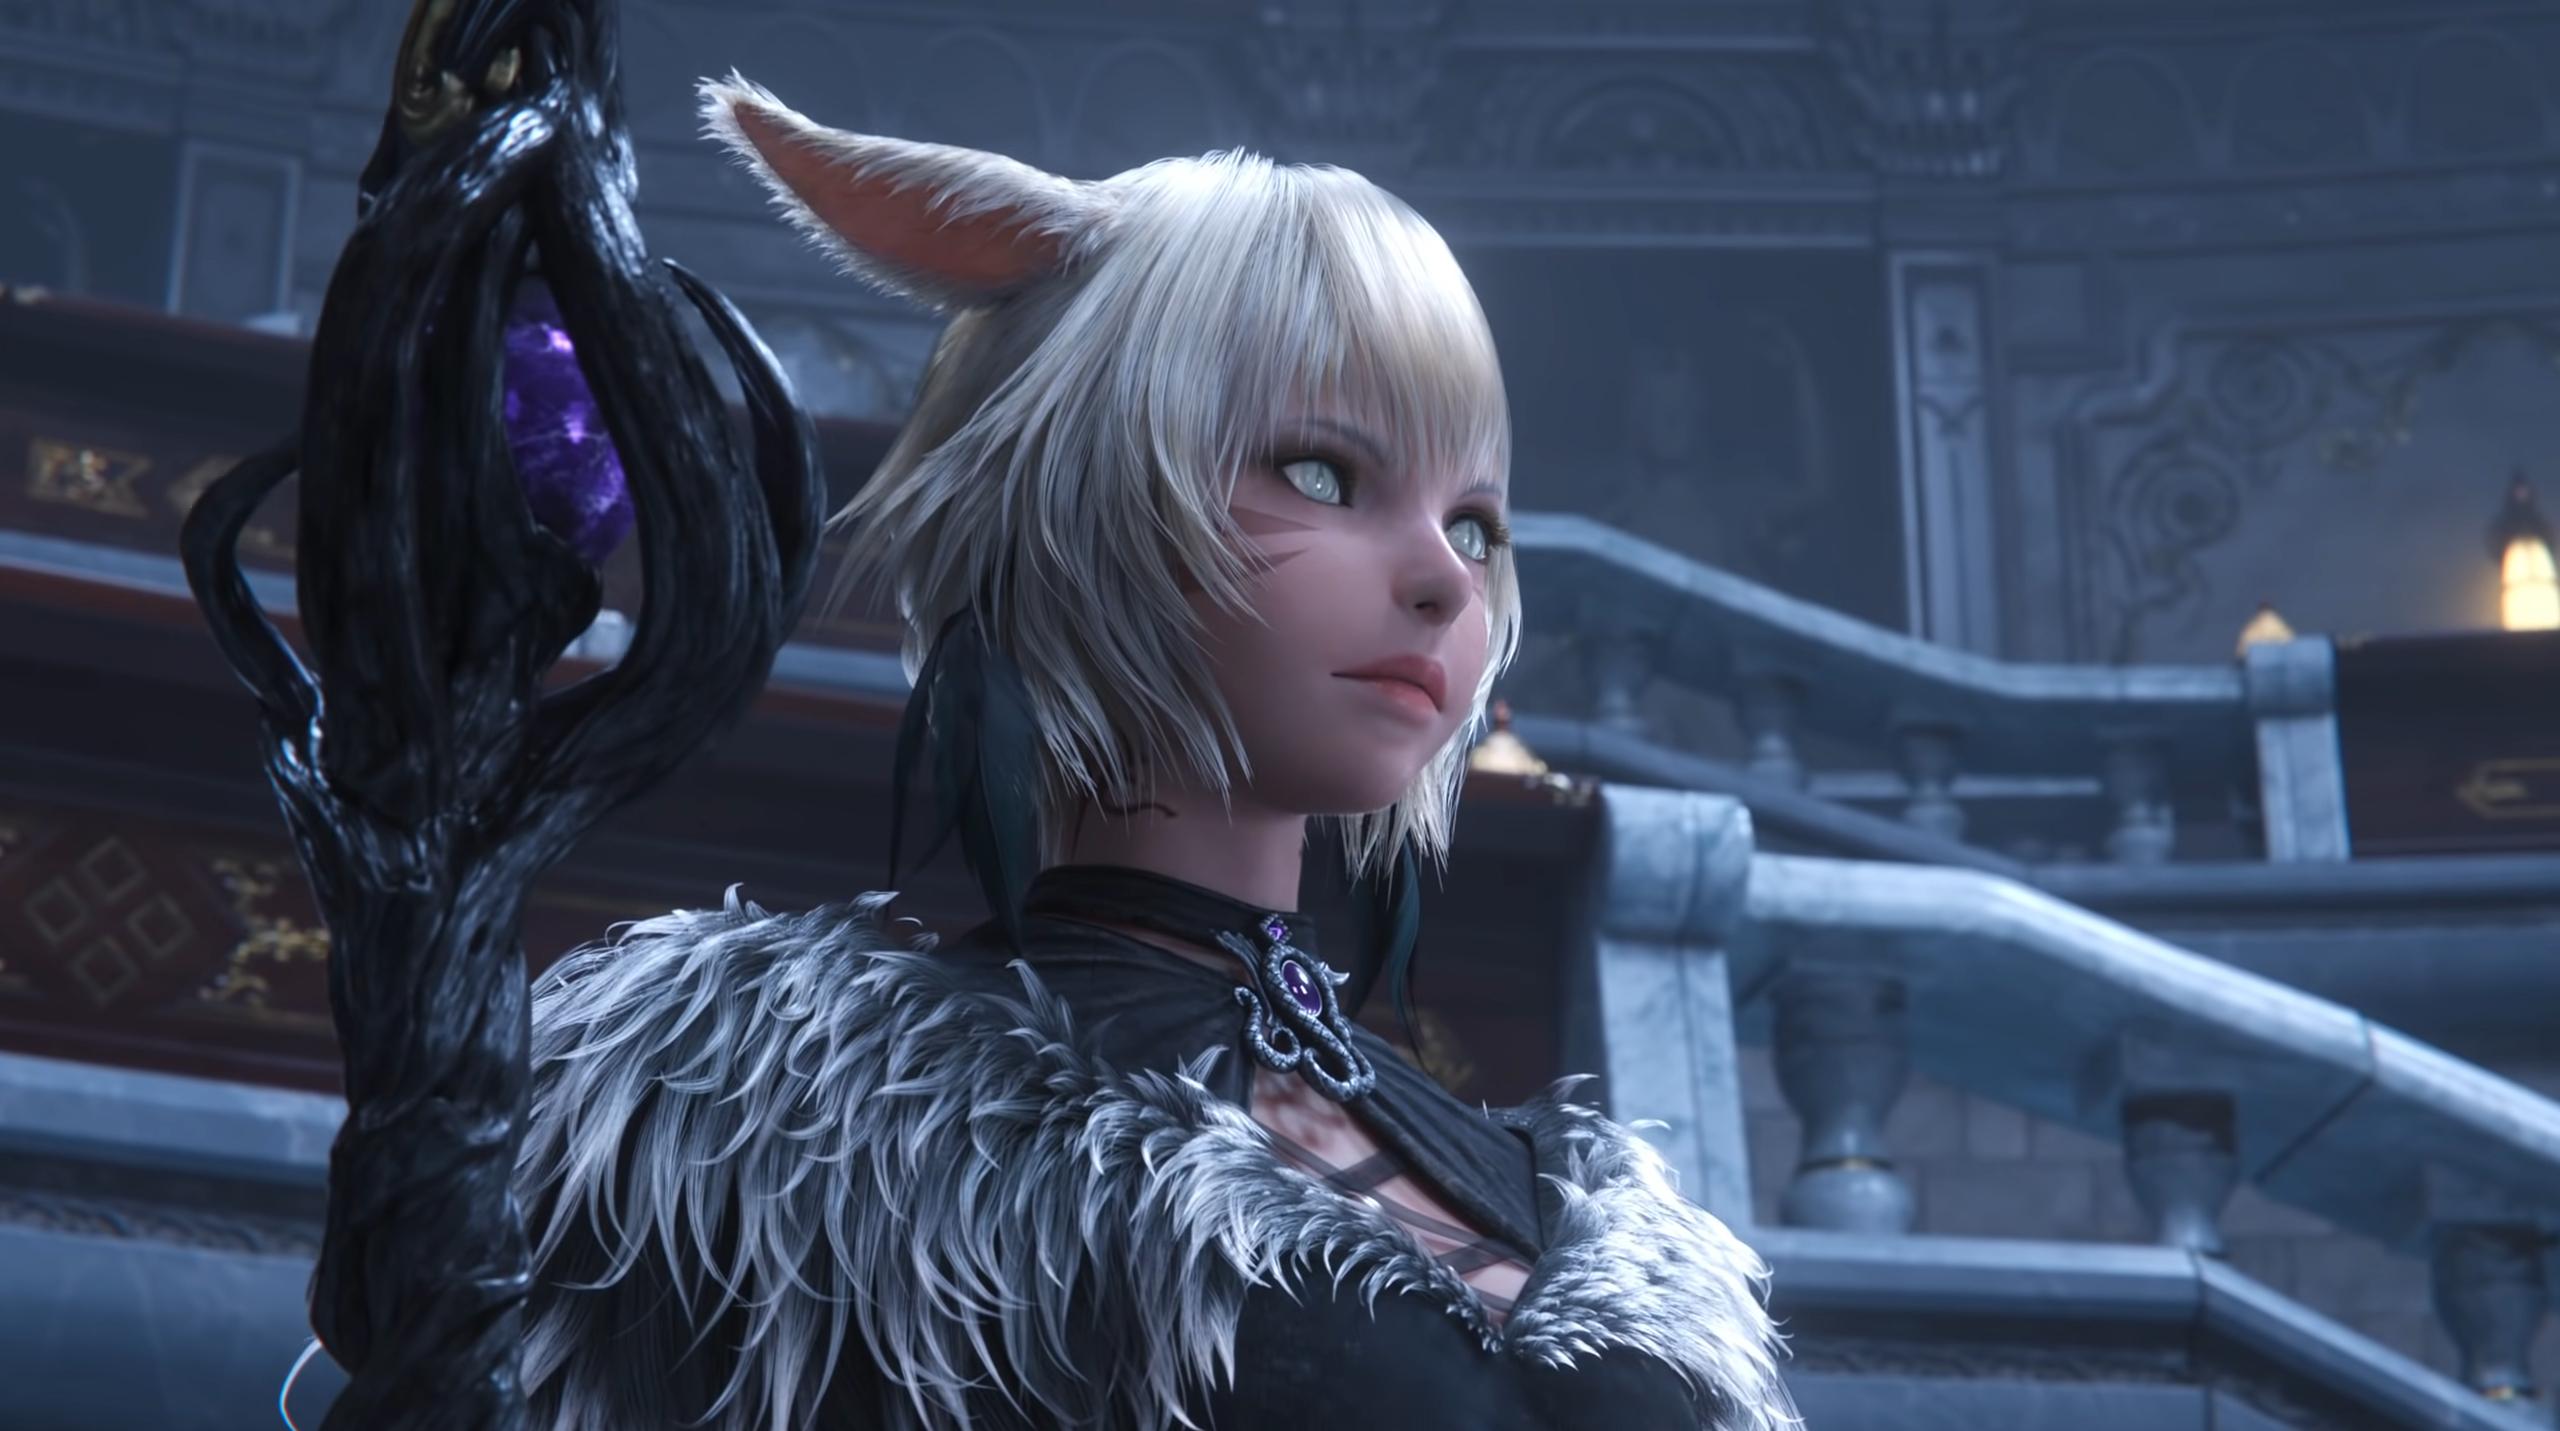  What to expect in Final Fantasy 14: Endwalker—new classes, stat squish, bunny boys and more 